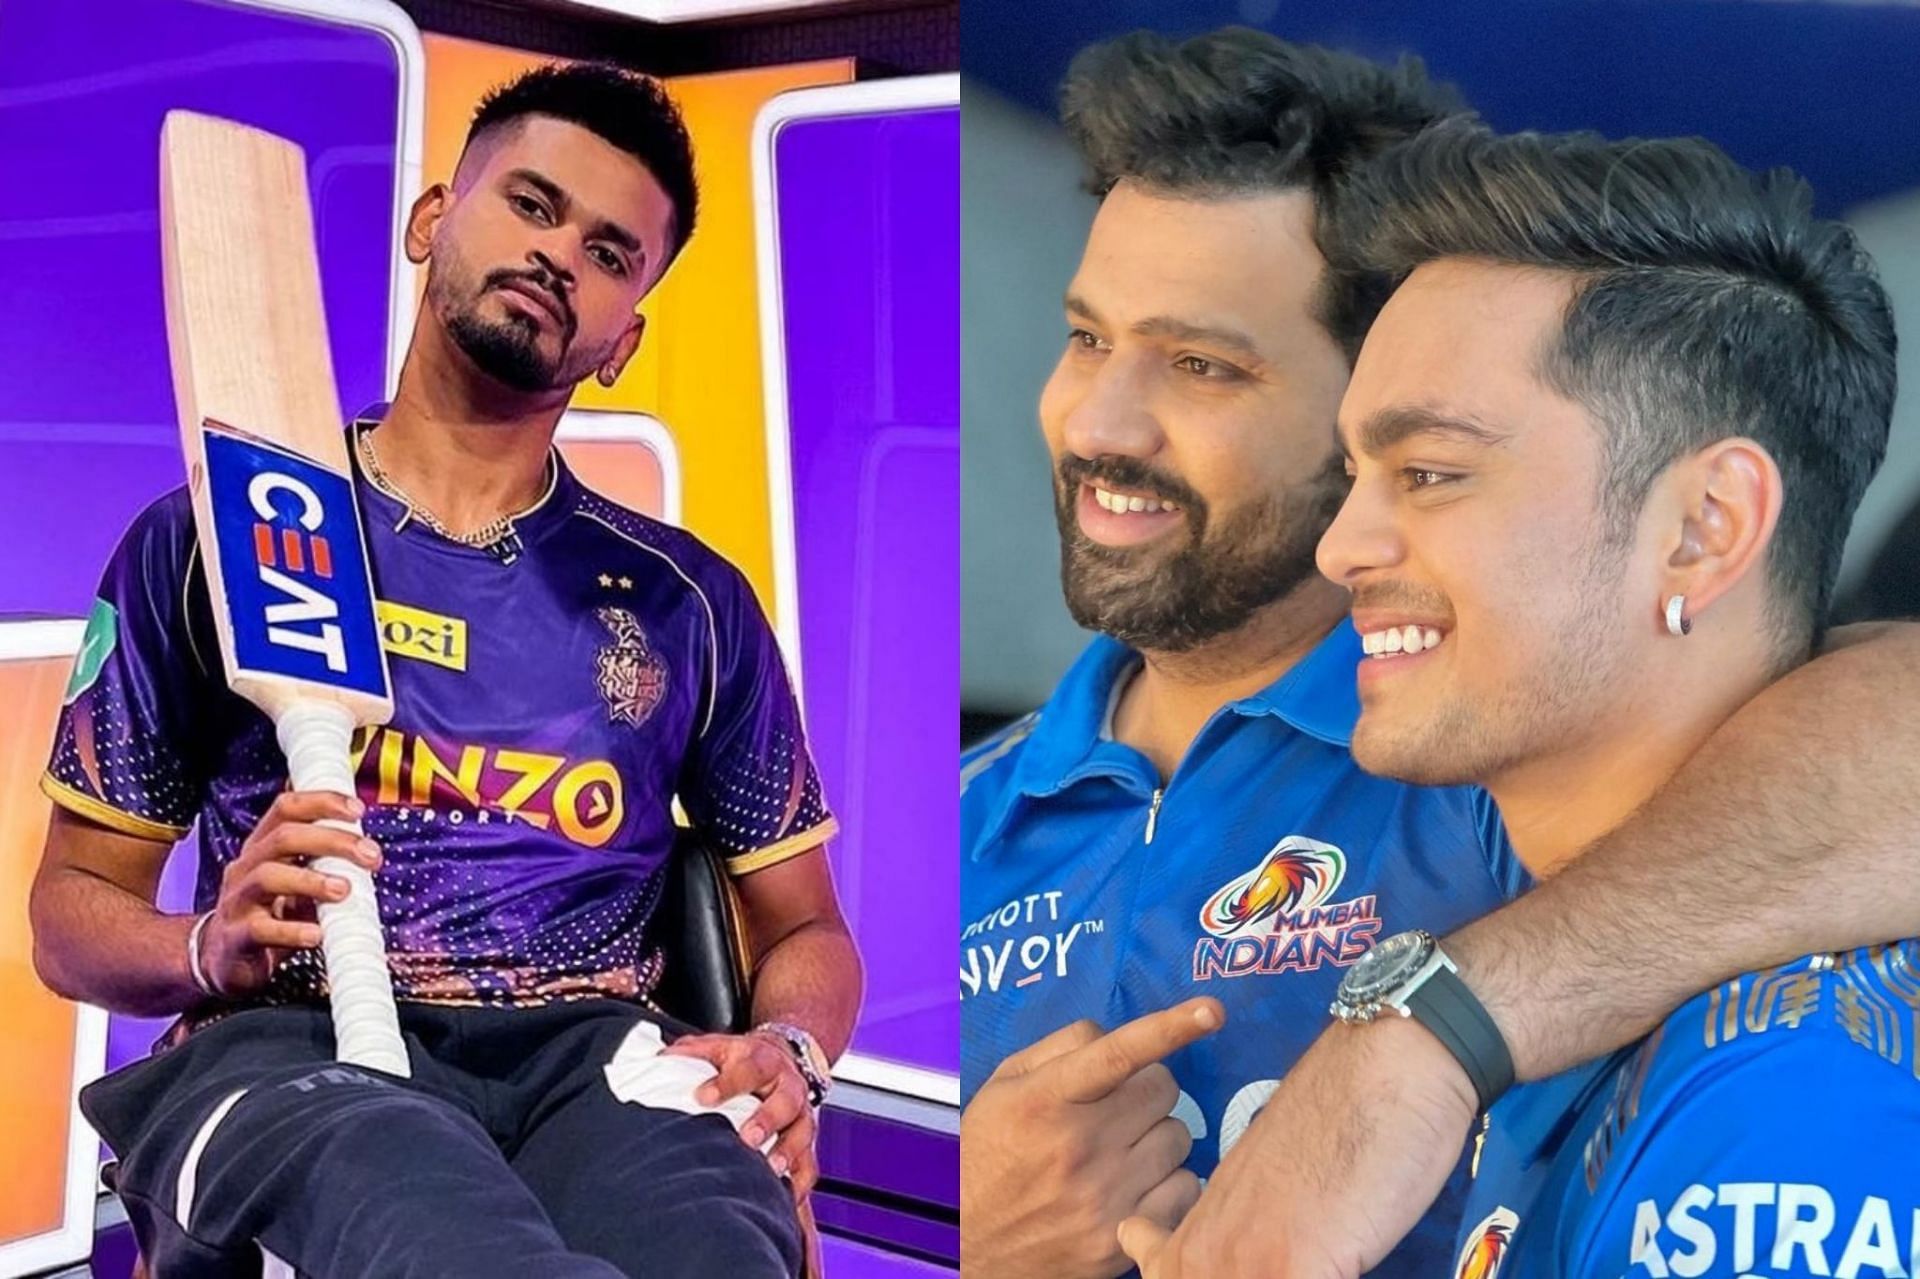 Kolkata Knight Riders and Mumbai Indians will lock horns against each other in Match 14 of the IPL 2022